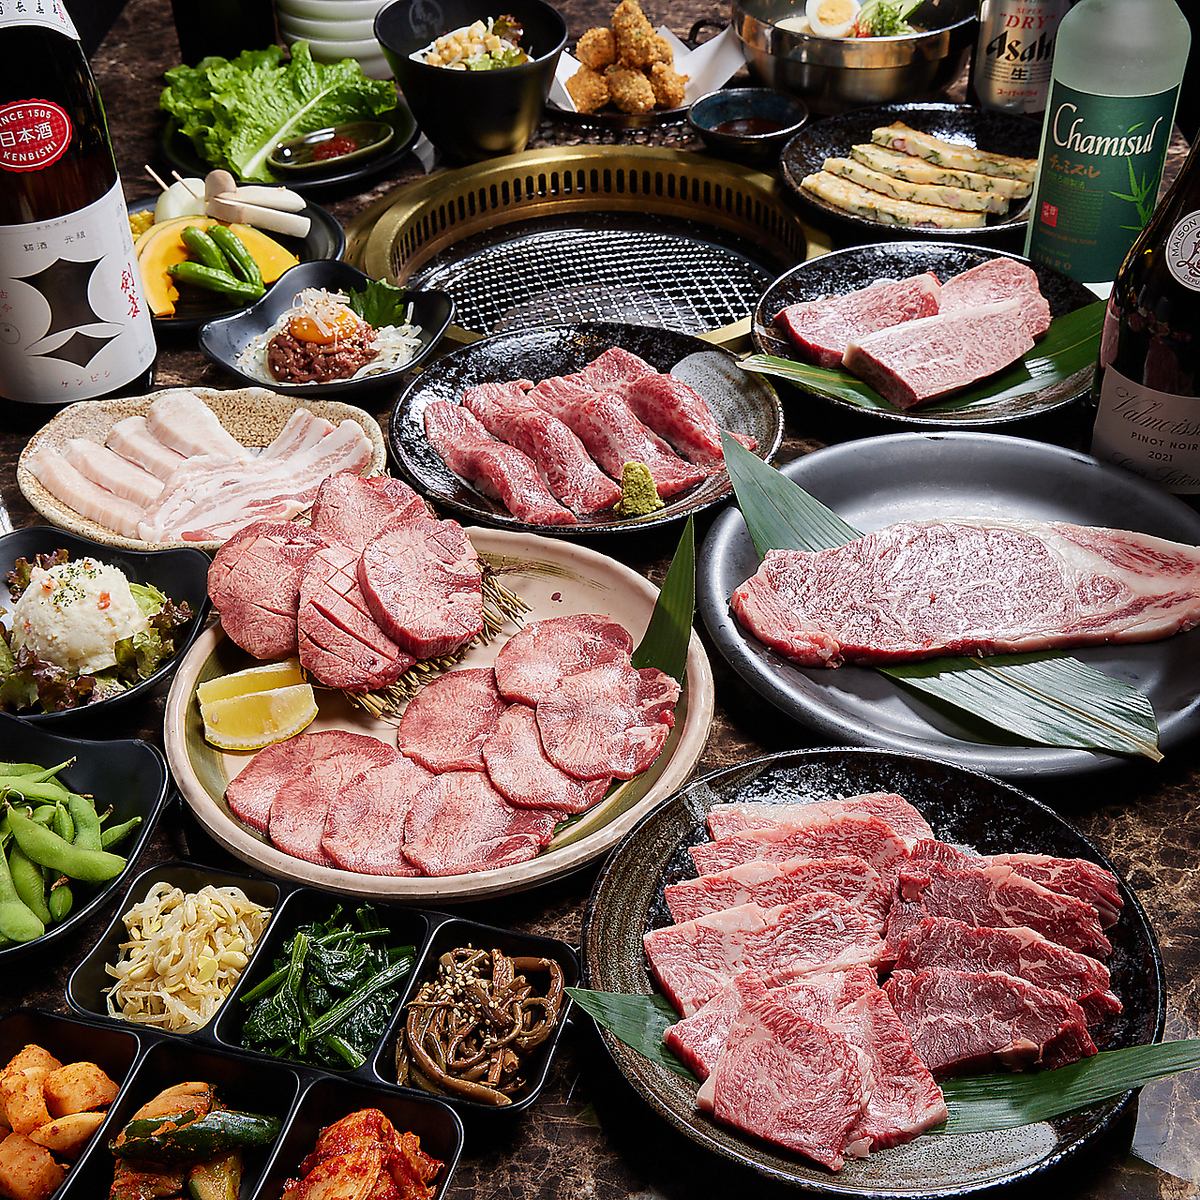 We have prepared a variety of exquisite meats! All-you-can-eat carefully selected Wagyu beef?!